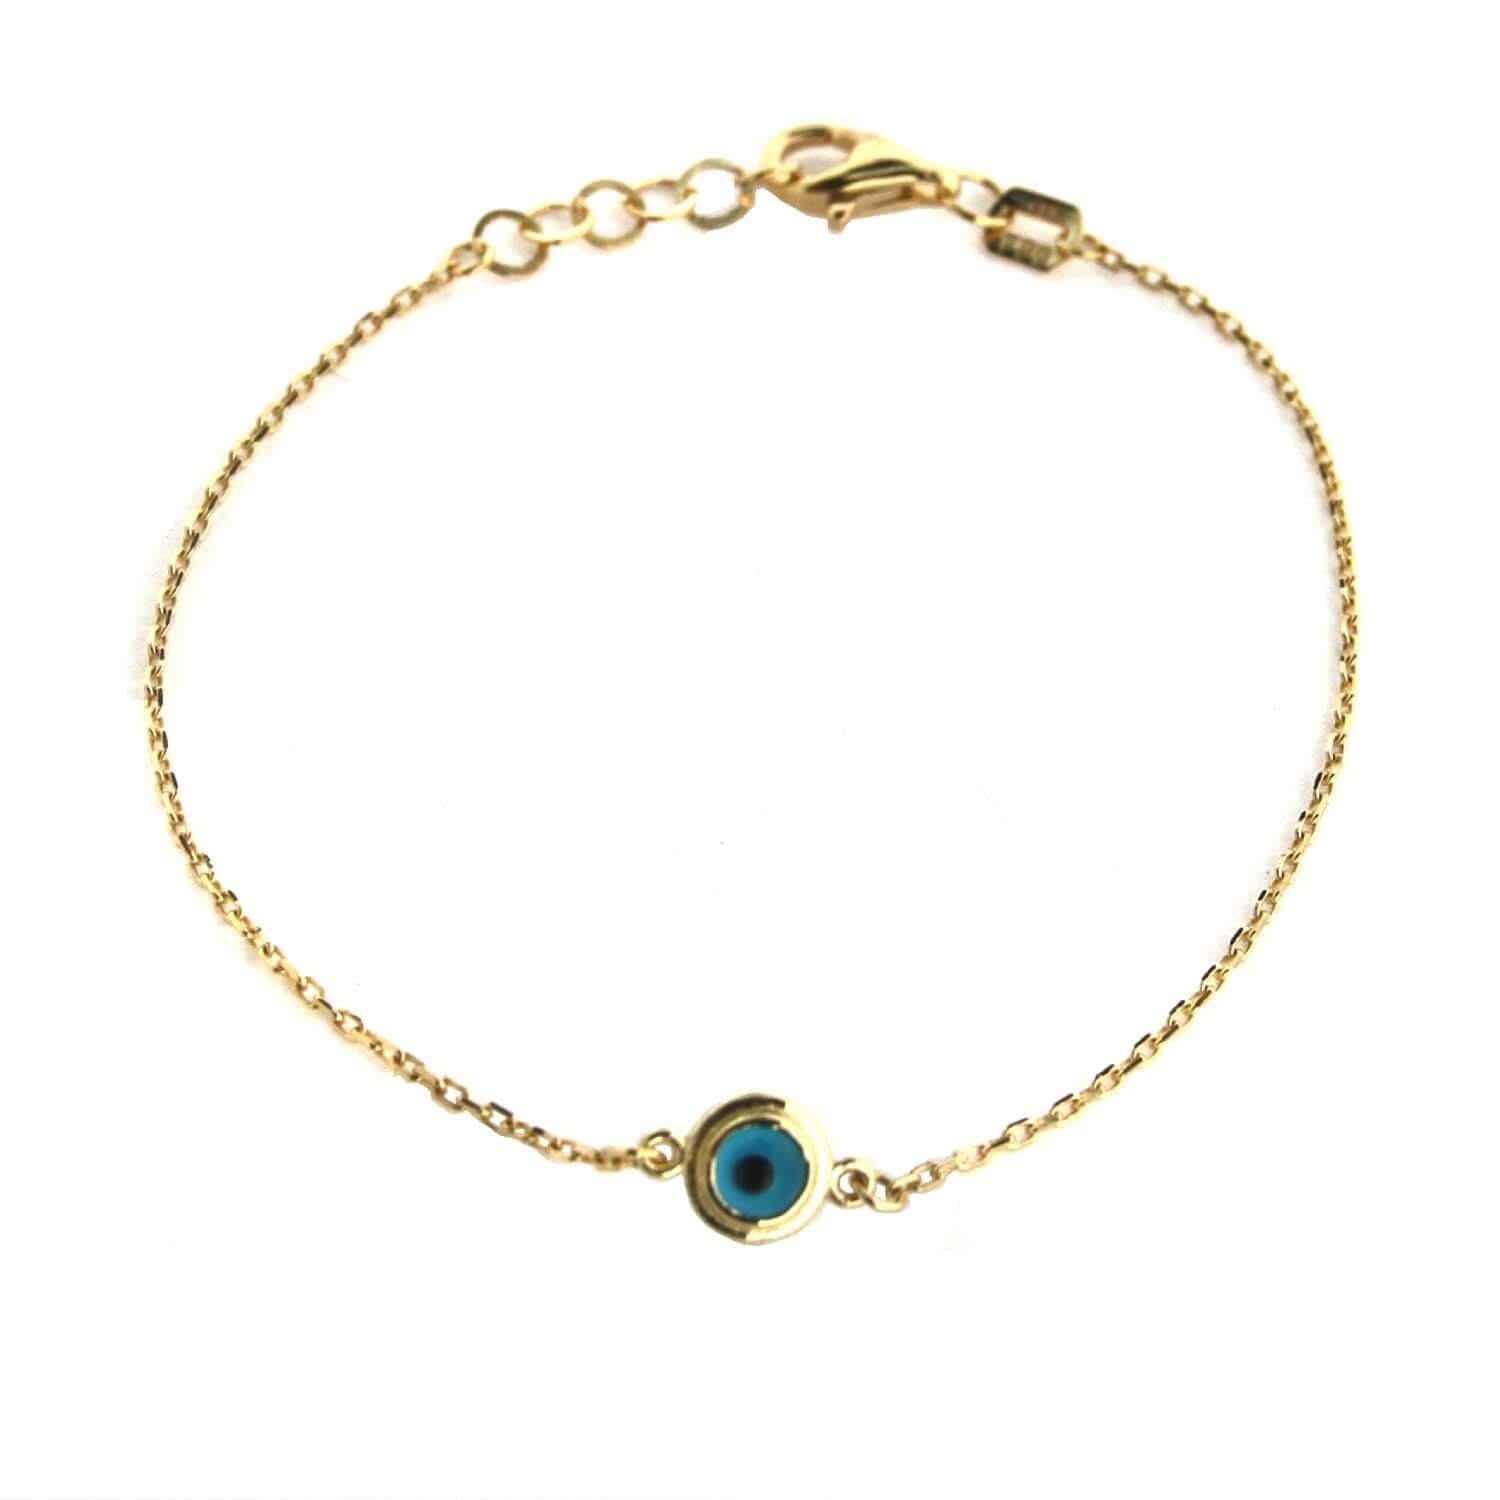 18K Solid Yellow Gold Evil Eye Bracelet 6 7 or 9 inches